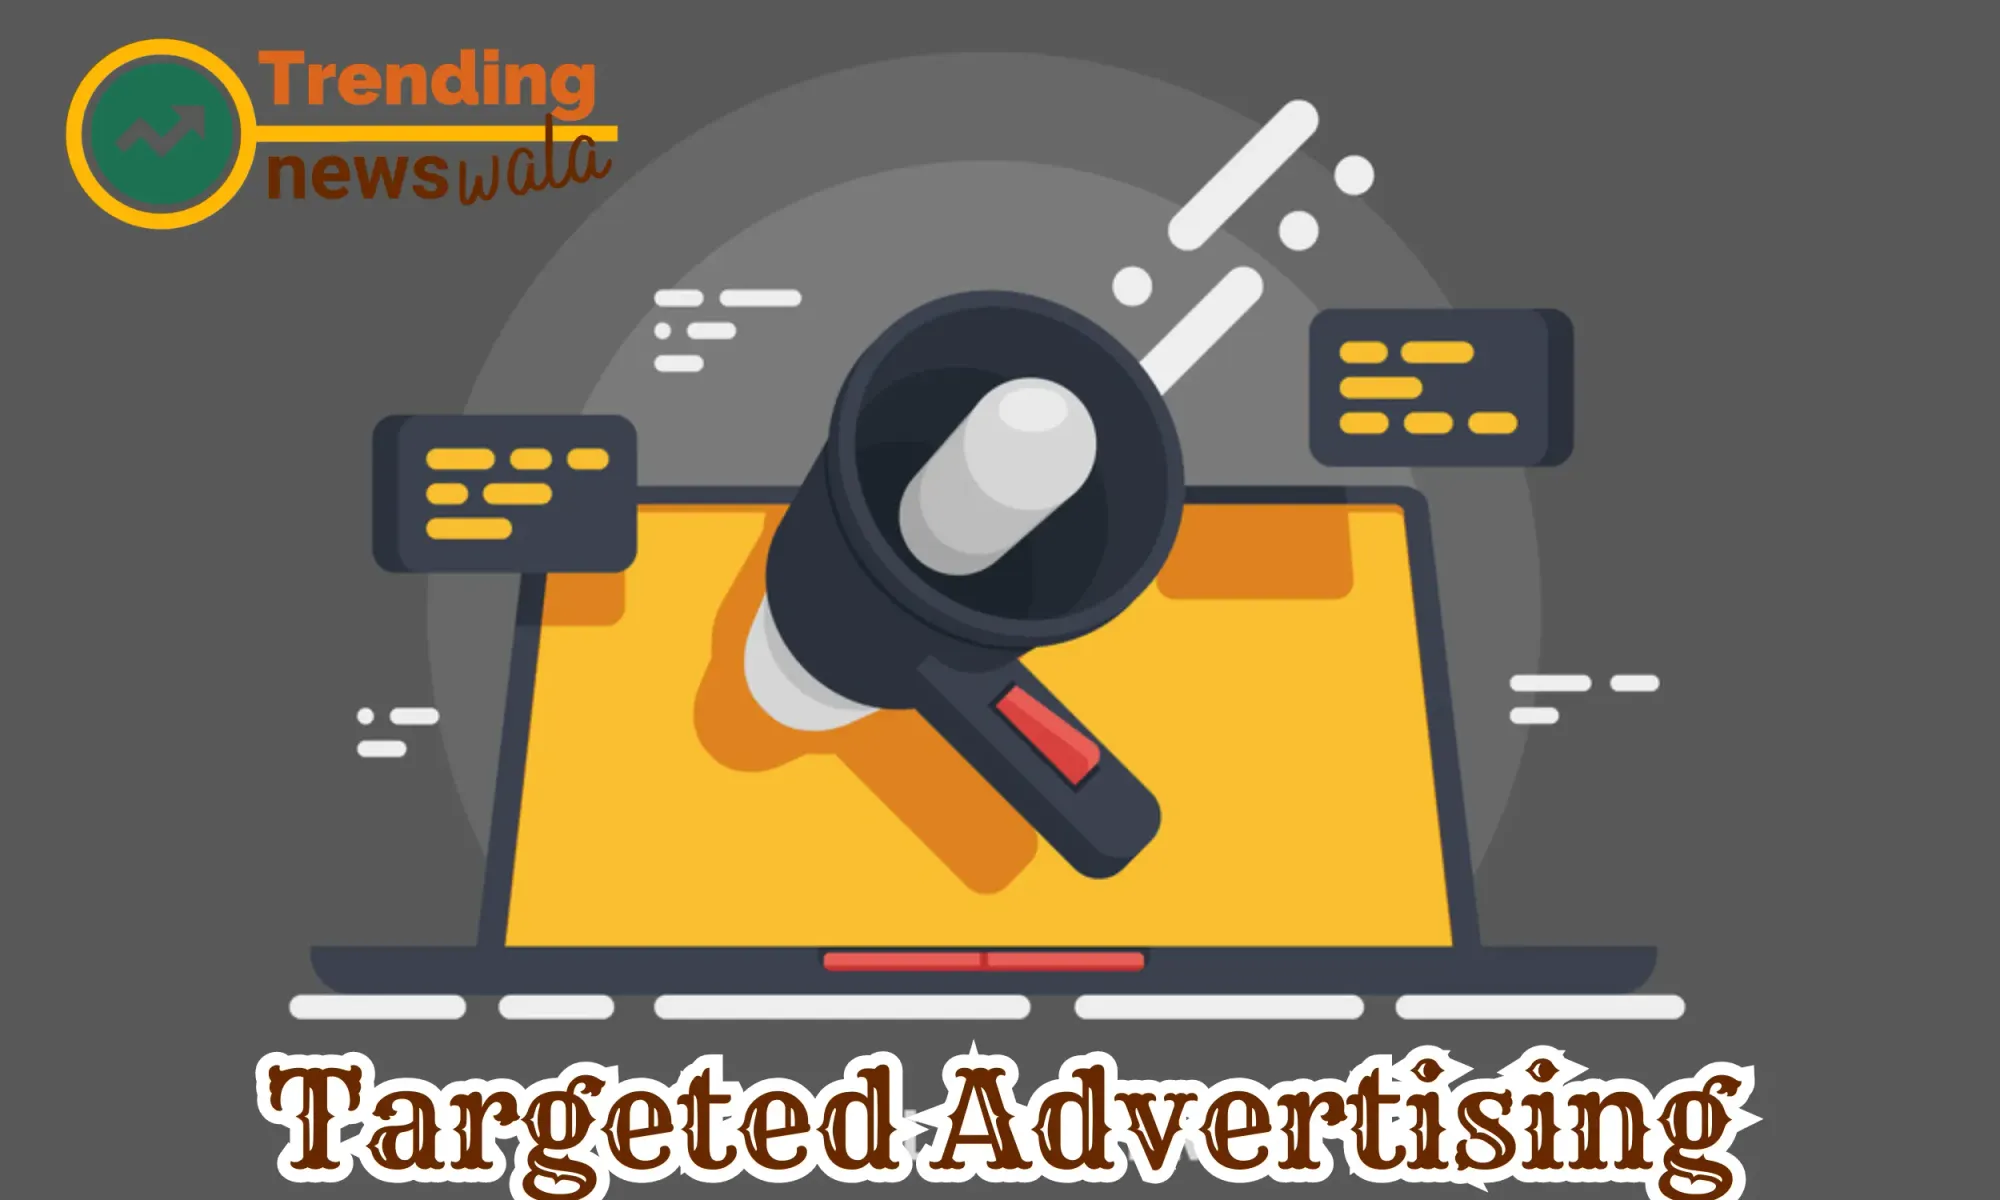 Targeted advertising, also known as personalized or precision advertising